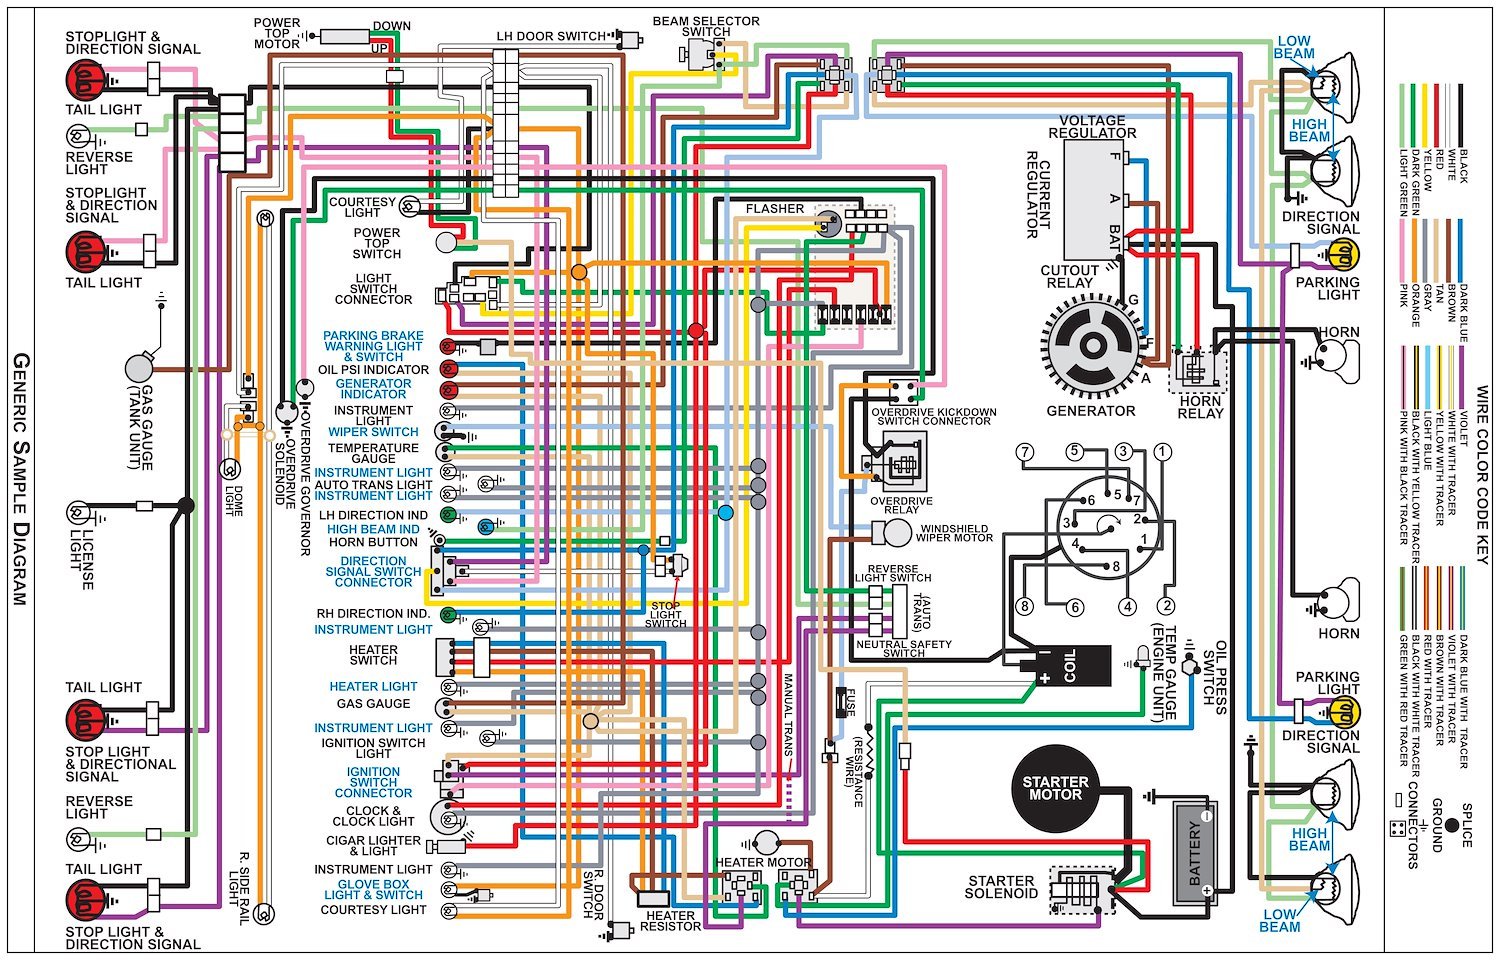 Wiring Diagram for 1977 Ford F-Series Truck, 11 in x 17 in., Laminated